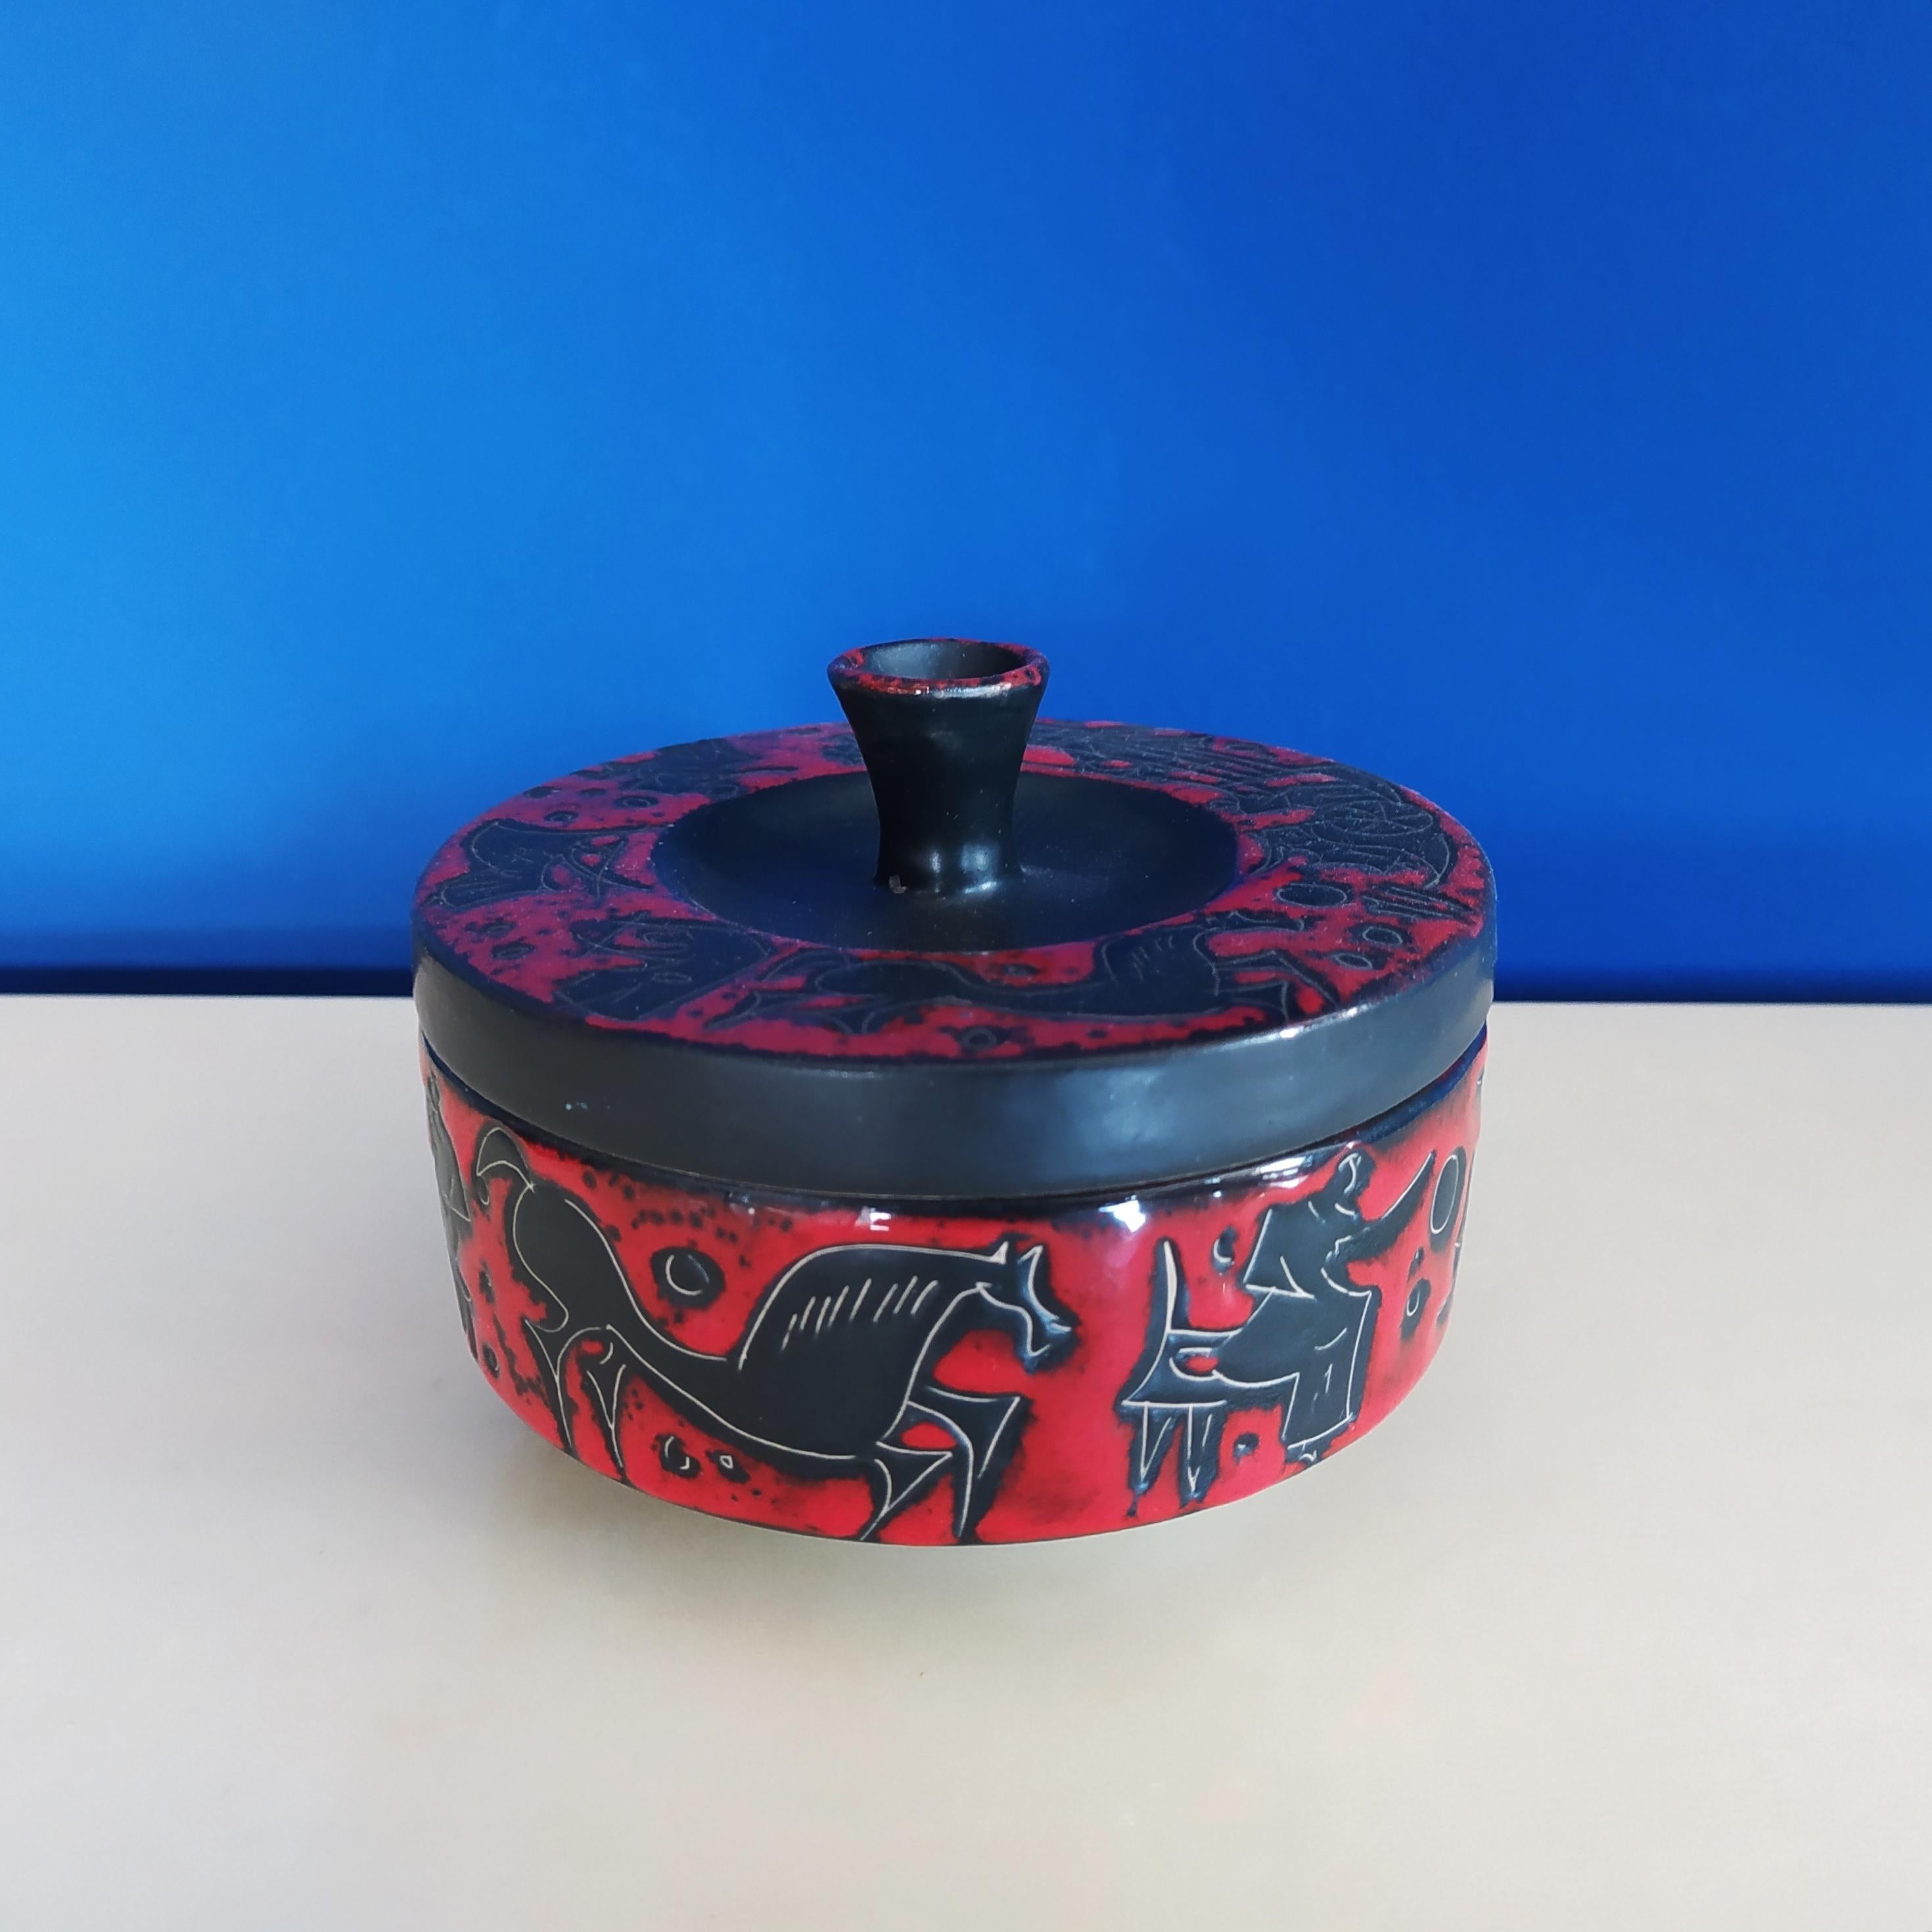 European 1950s Astonishing Set of 3 Boxes Red and Black in Ceramic